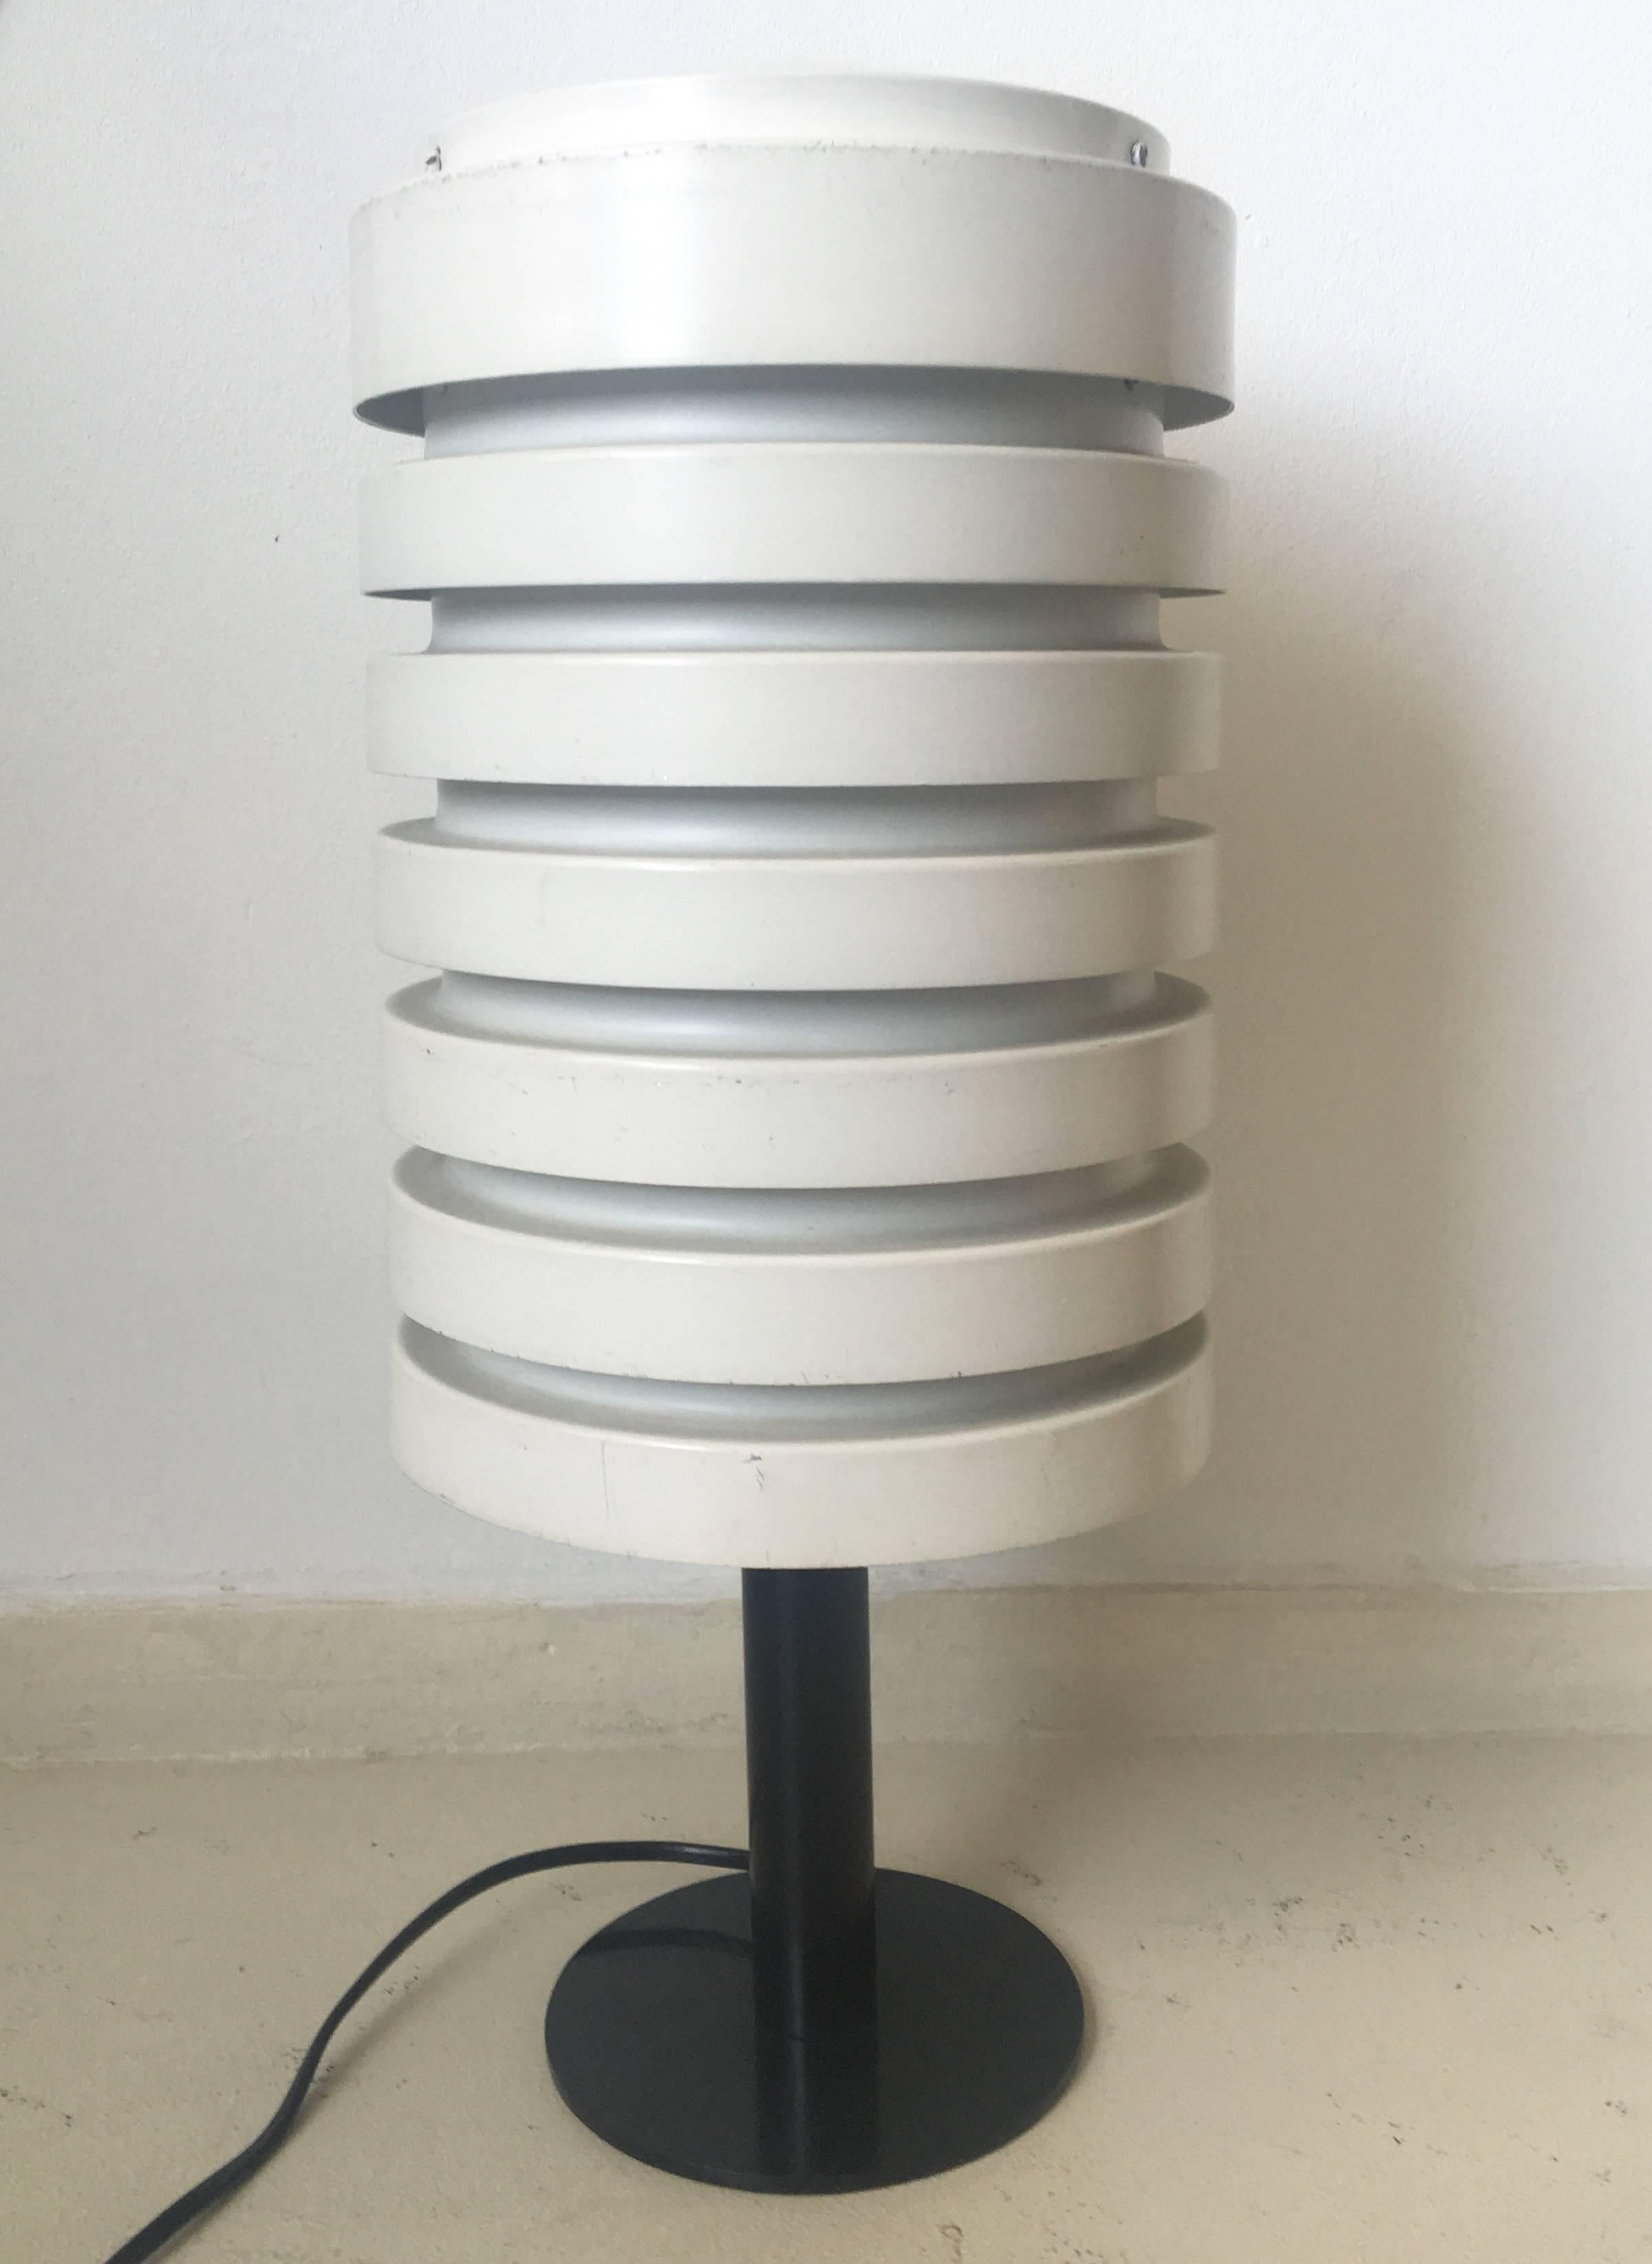 This table lamp was designed by Hans Agne Jakobsson in Sweden, circa 1960s.

It features a (off) white lacquered metal shade and a black lacquered metal base. The lamp still has its original European wiring. This wonderful item remains in a very